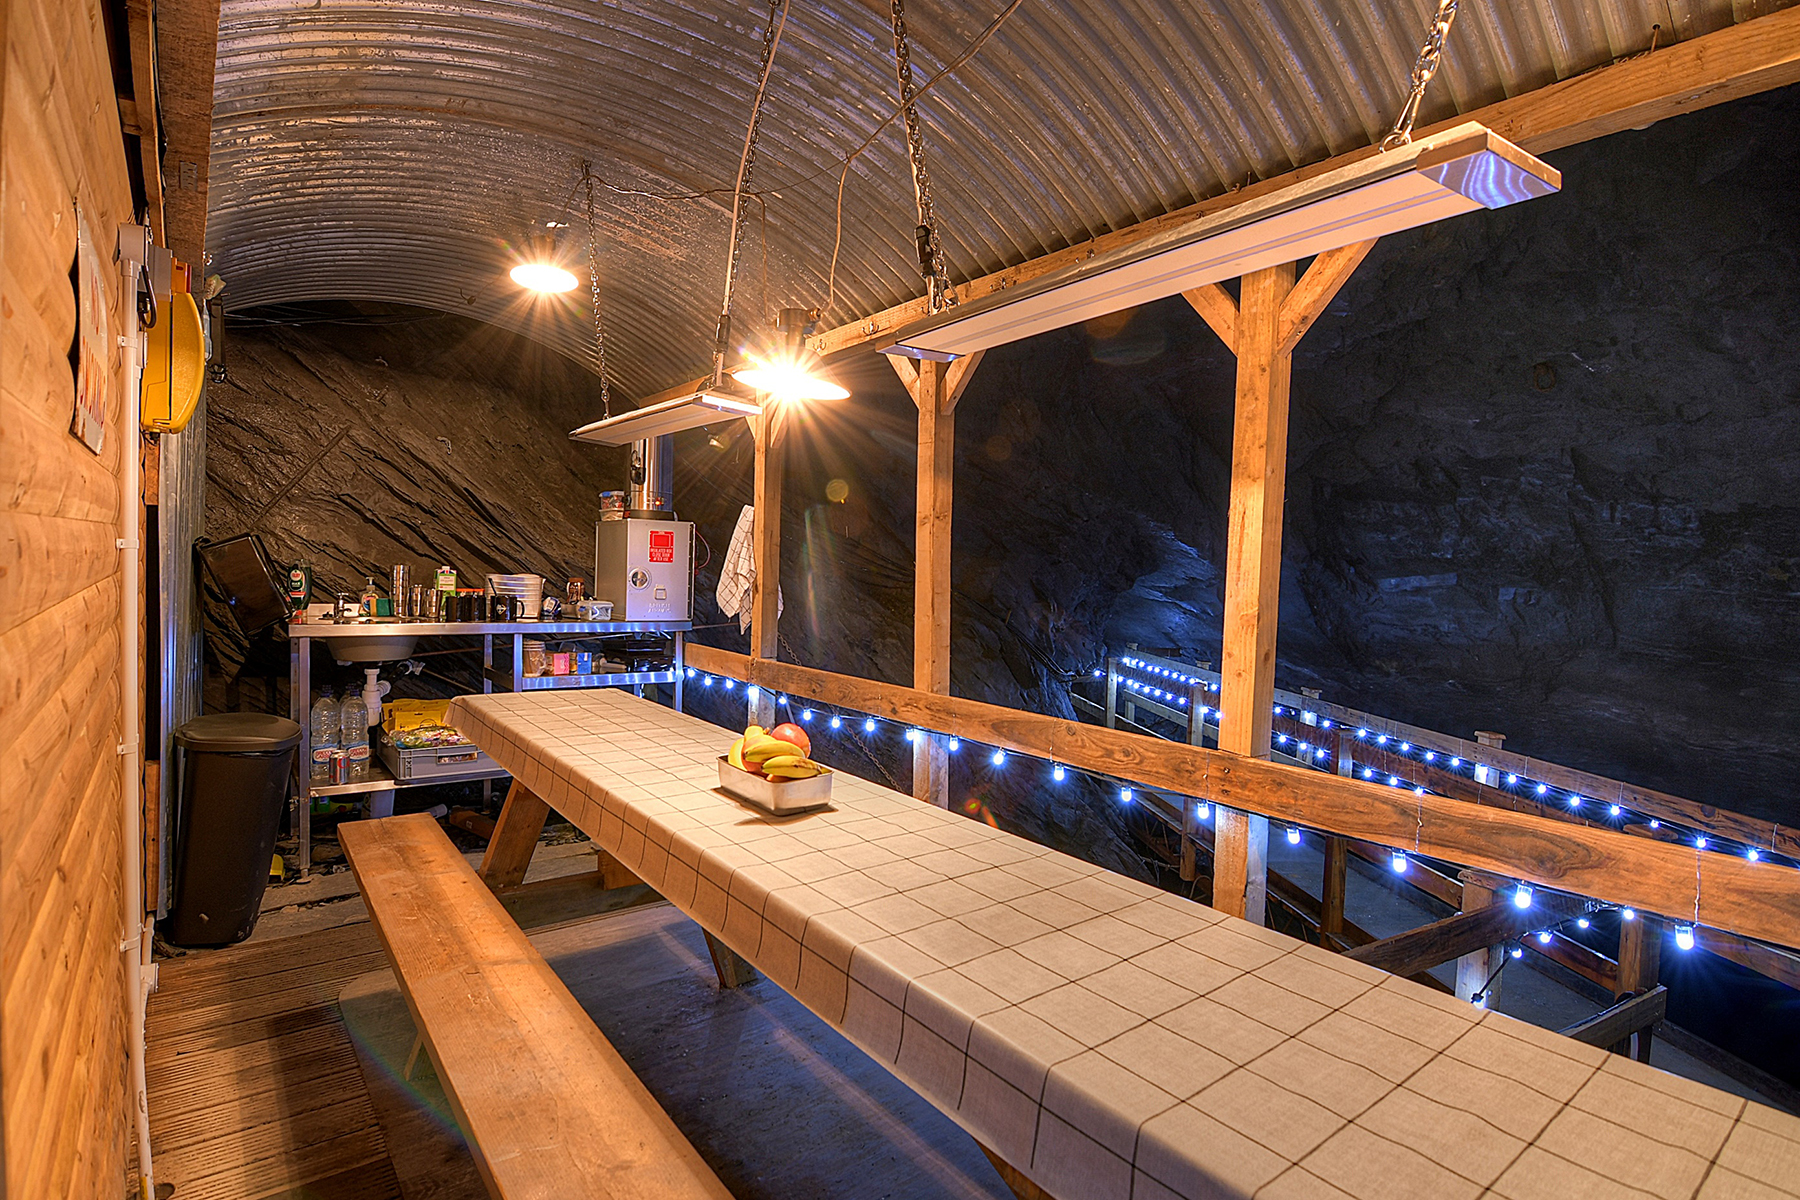 EATING AREA WITH PICNIC TABLE IN UNDERGROUND CAVERN